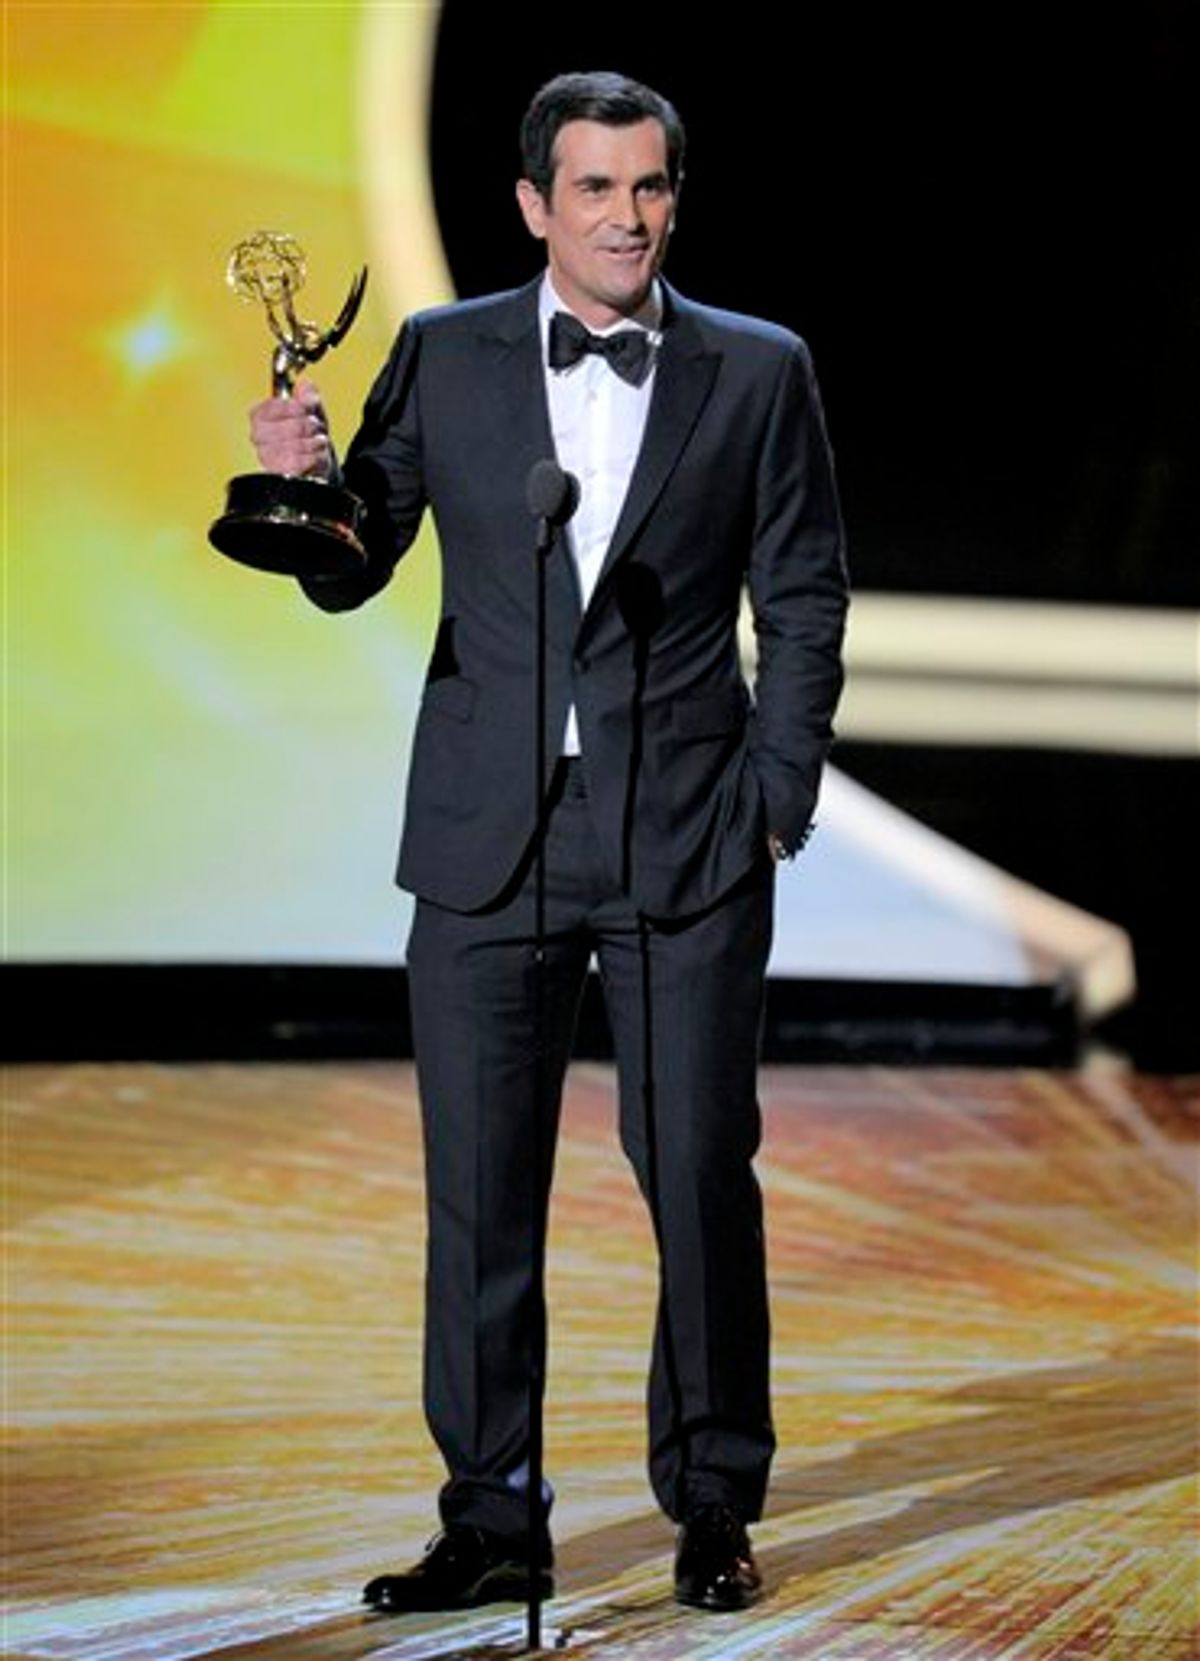 Ty Burrell accepts the award for outstanding supporting actor in a comedy series for Modern Family at the 63rd Primetime Emmy Awards on Sunday, Sept. 18, 2011 in Los Angeles. (AP Photo/Mark J. Terrill) (AP)